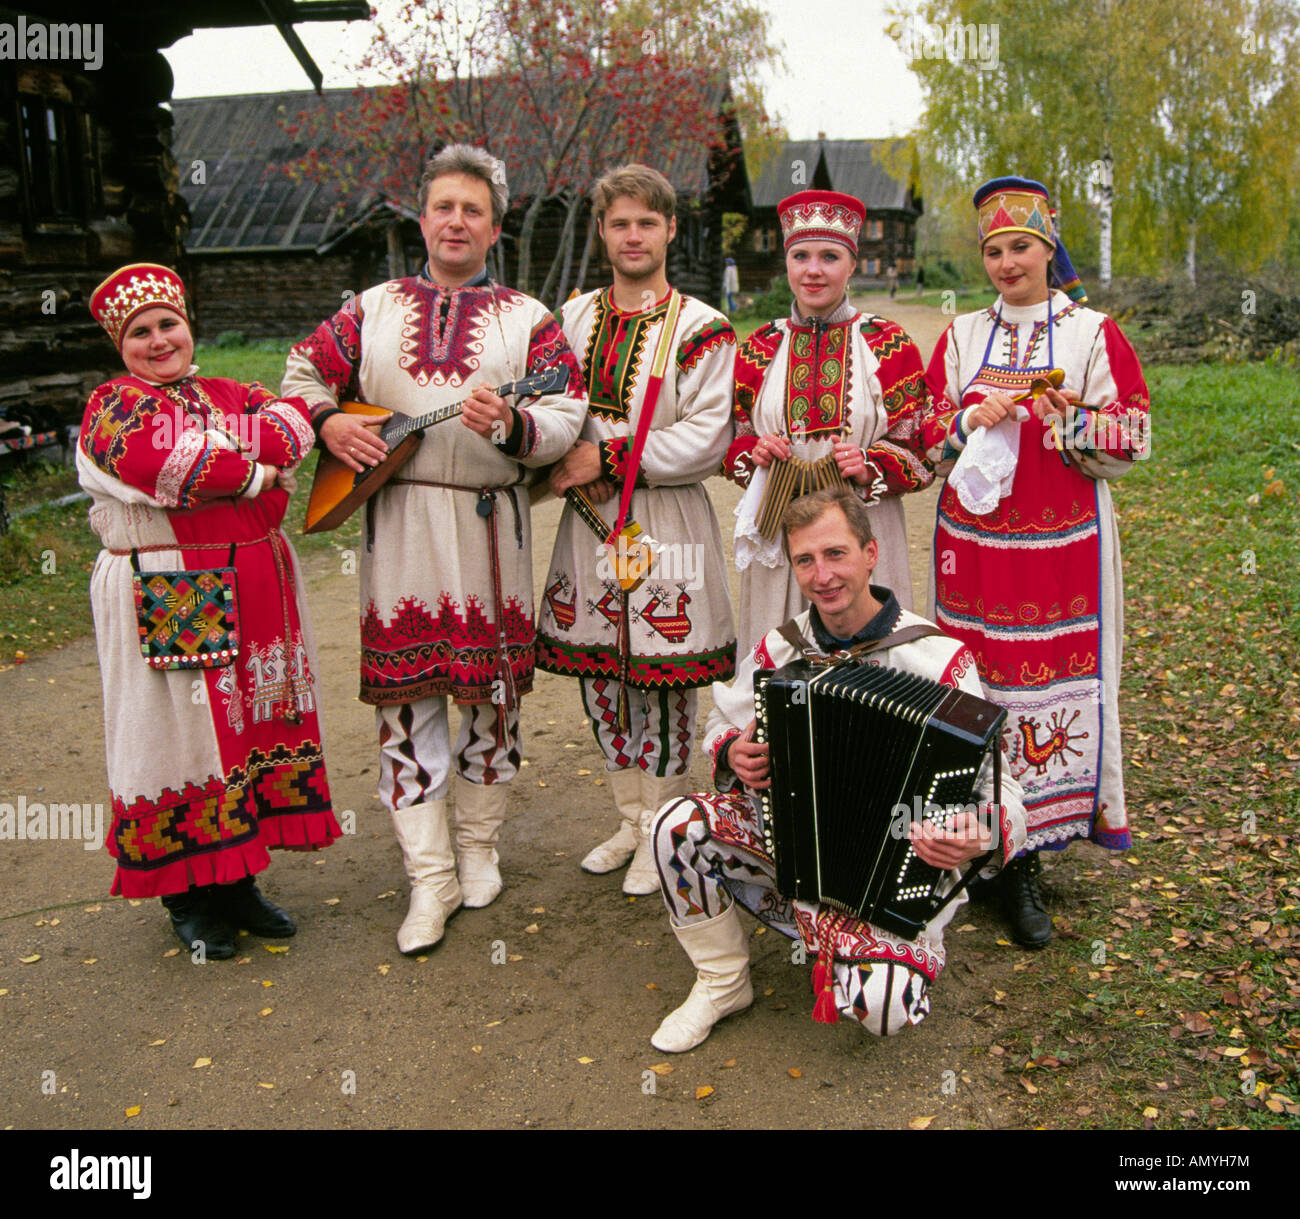 a-russian-folk-music-group-in-traditional-clothing-in-a-small-remote-AMYH7M.jpg